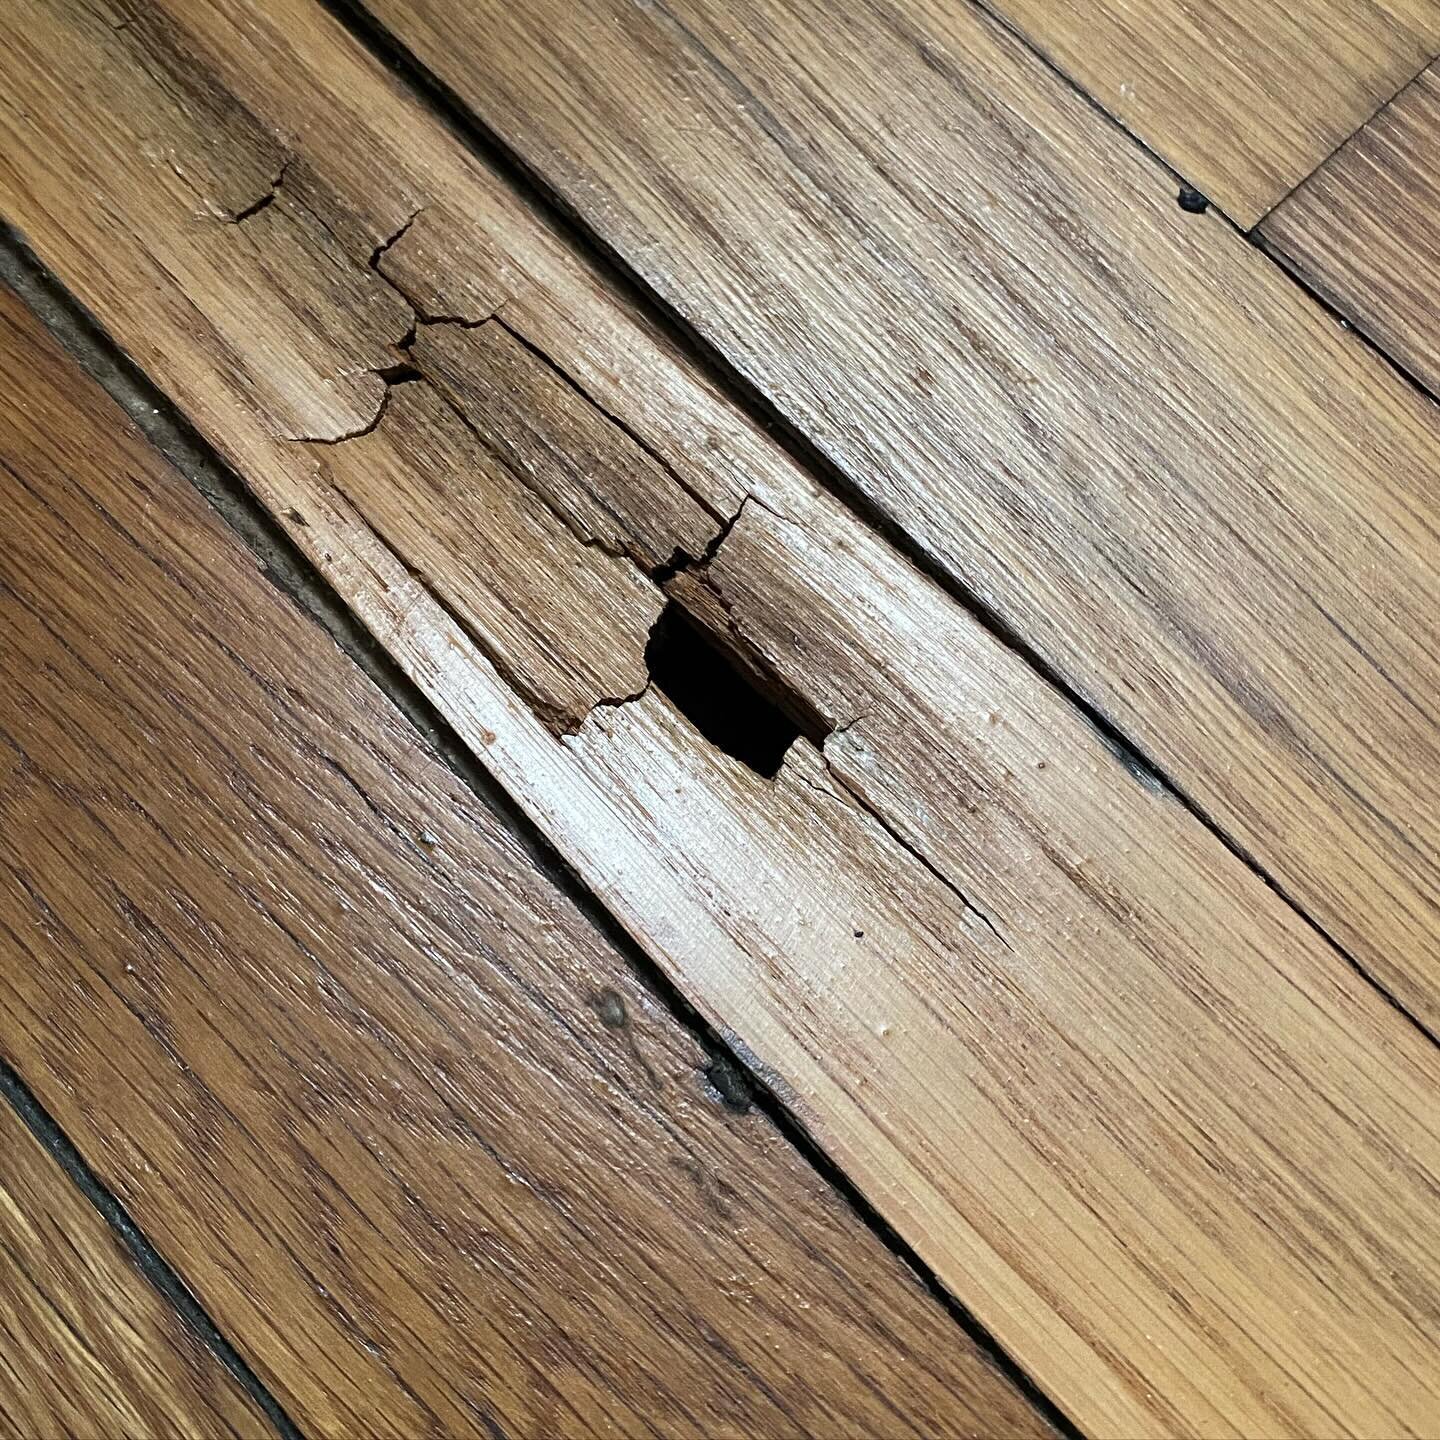 Felt a strong draft during the cold snap. Discovered a hole in my floor. Ugh. Googling &ldquo;brown duct tape&rdquo;.